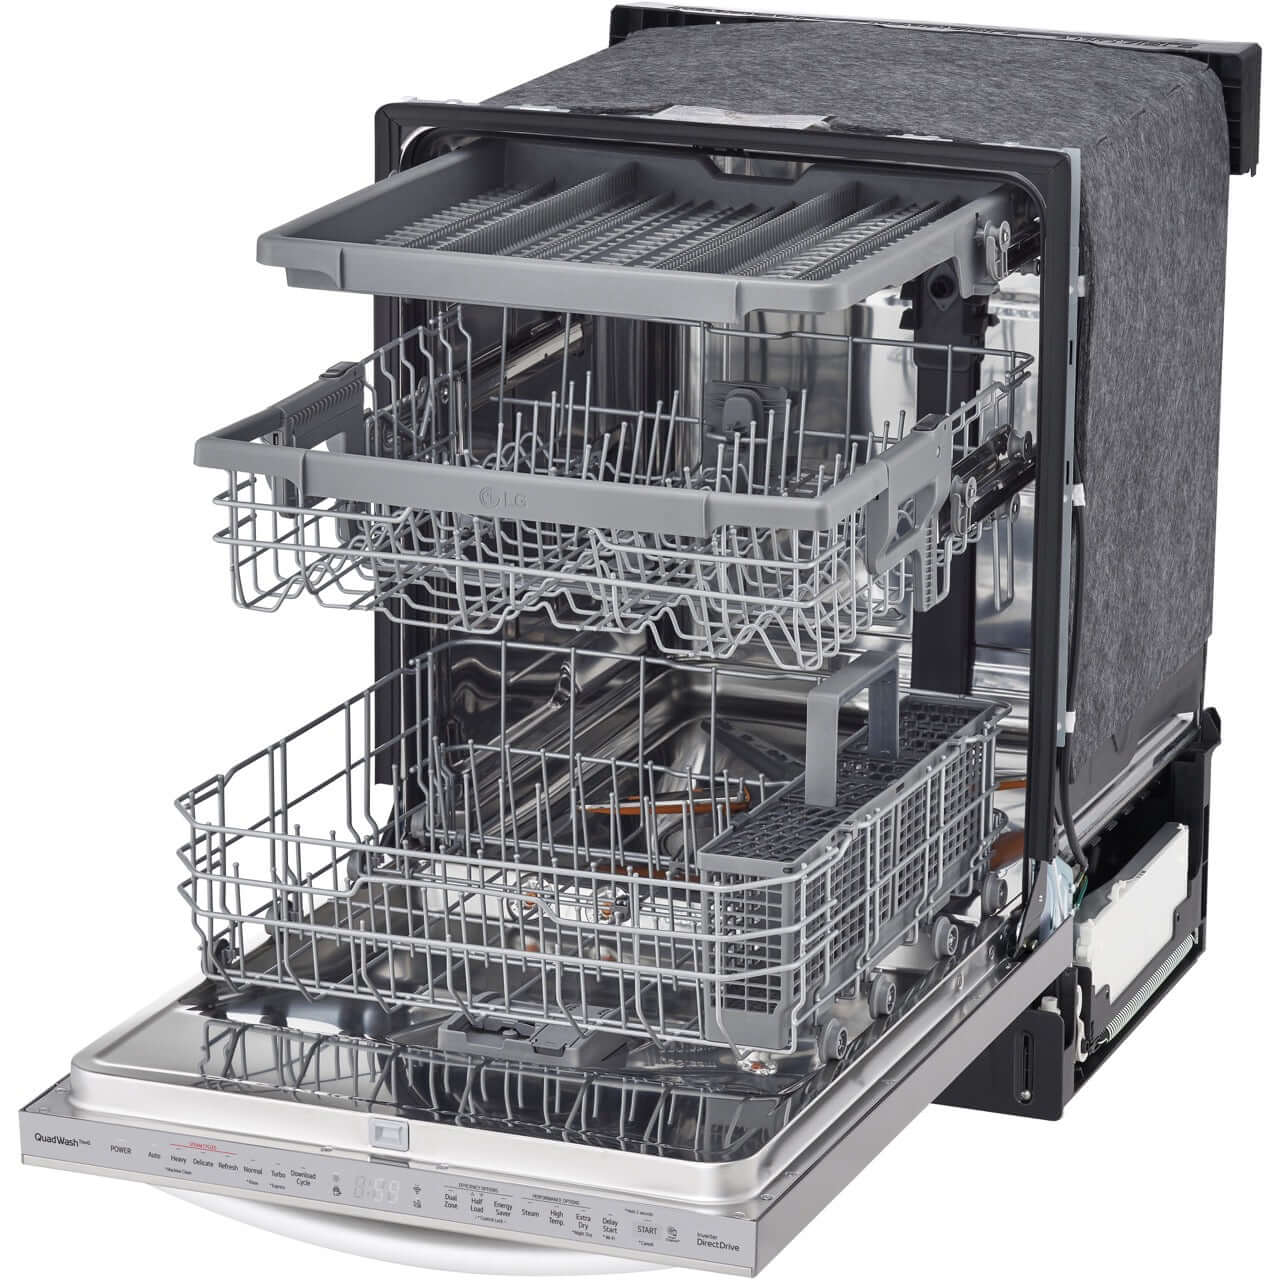 LG 24-Inch Top Control Wi-Fi Enabled Dishwasher with TrueSteam and 3rd Rack (LDTS5552S)